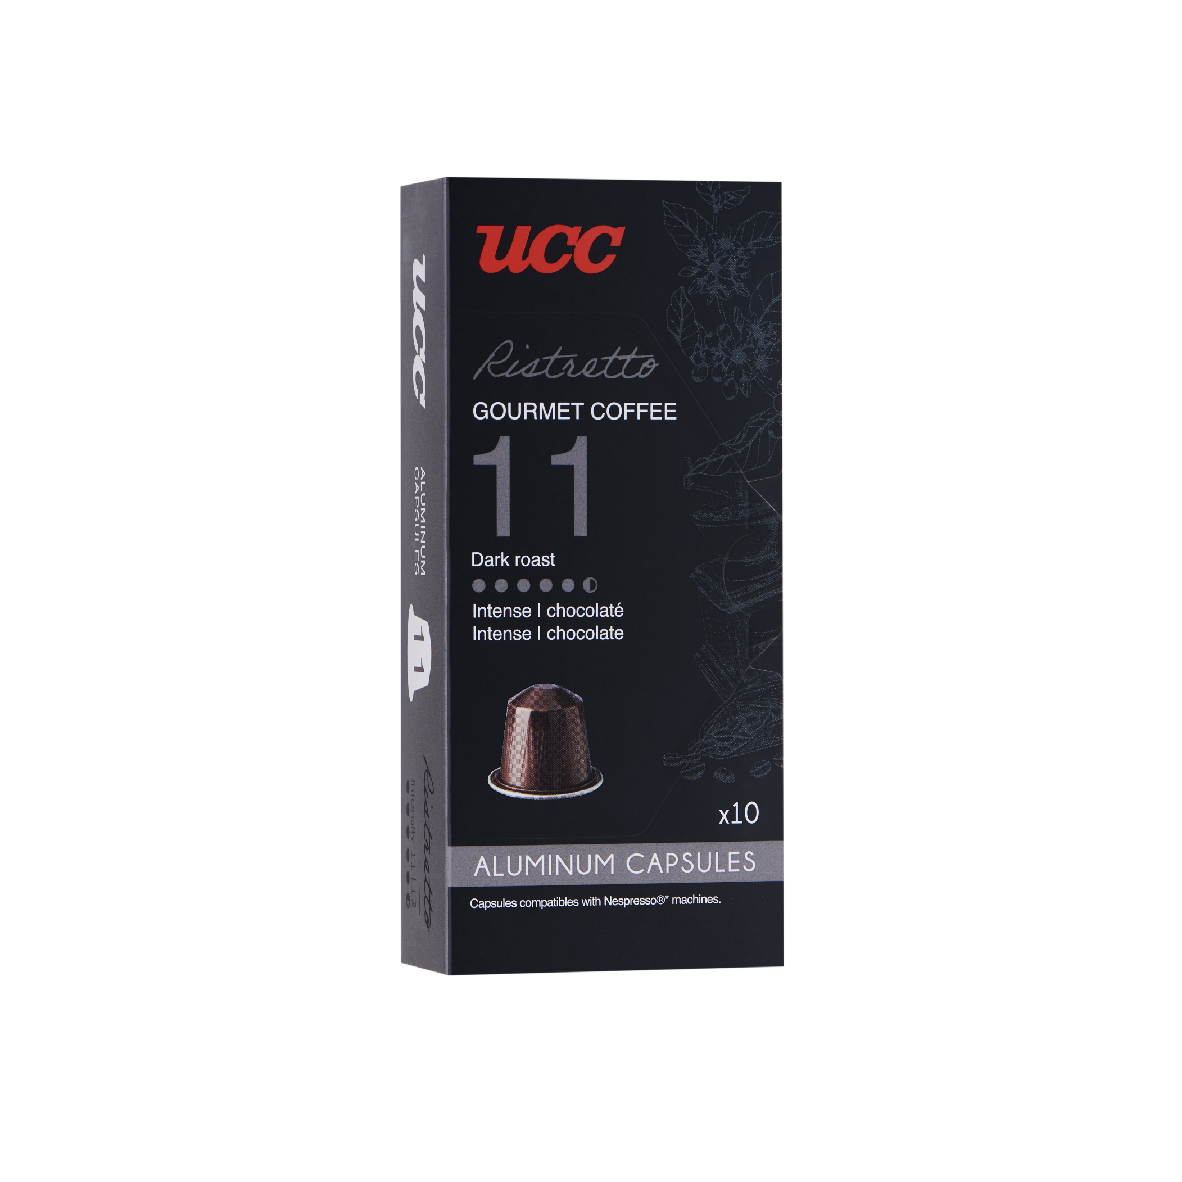 UCC Gourmet Collection Ristretto